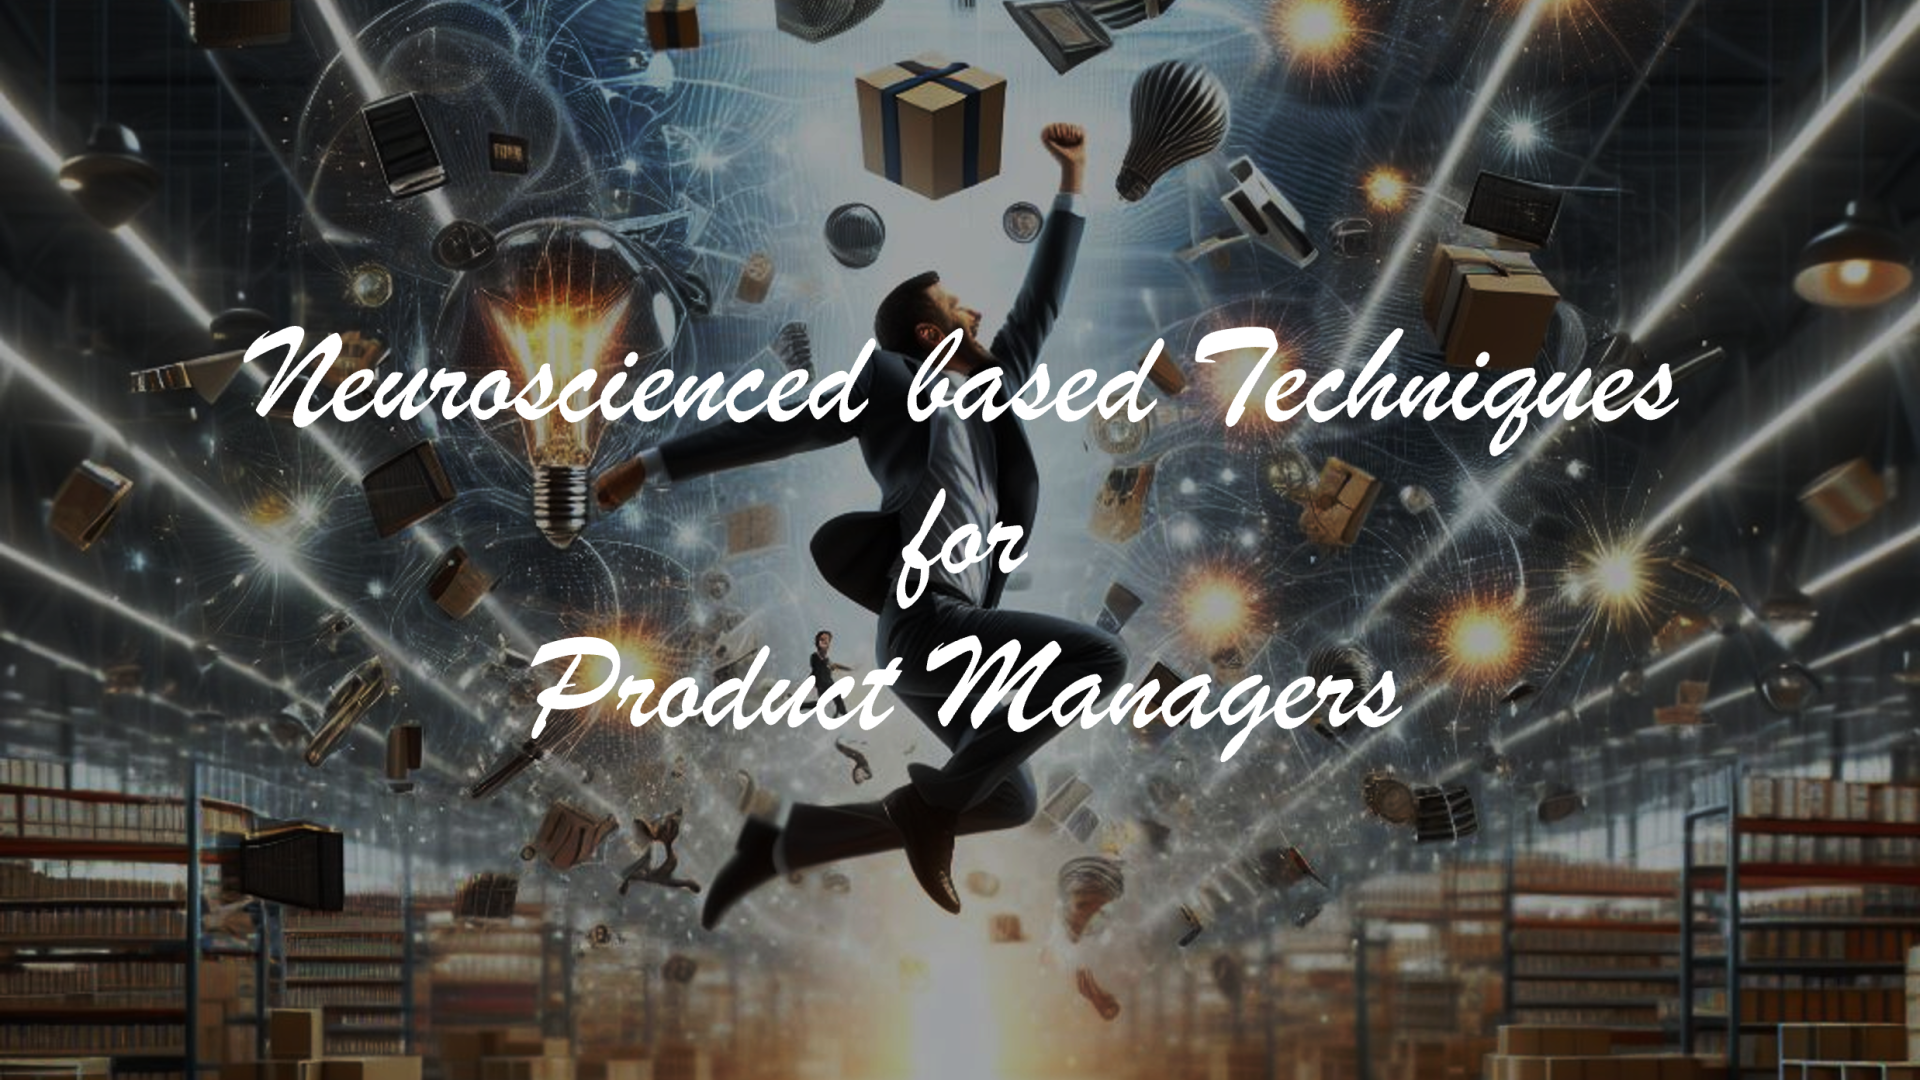 Product managers